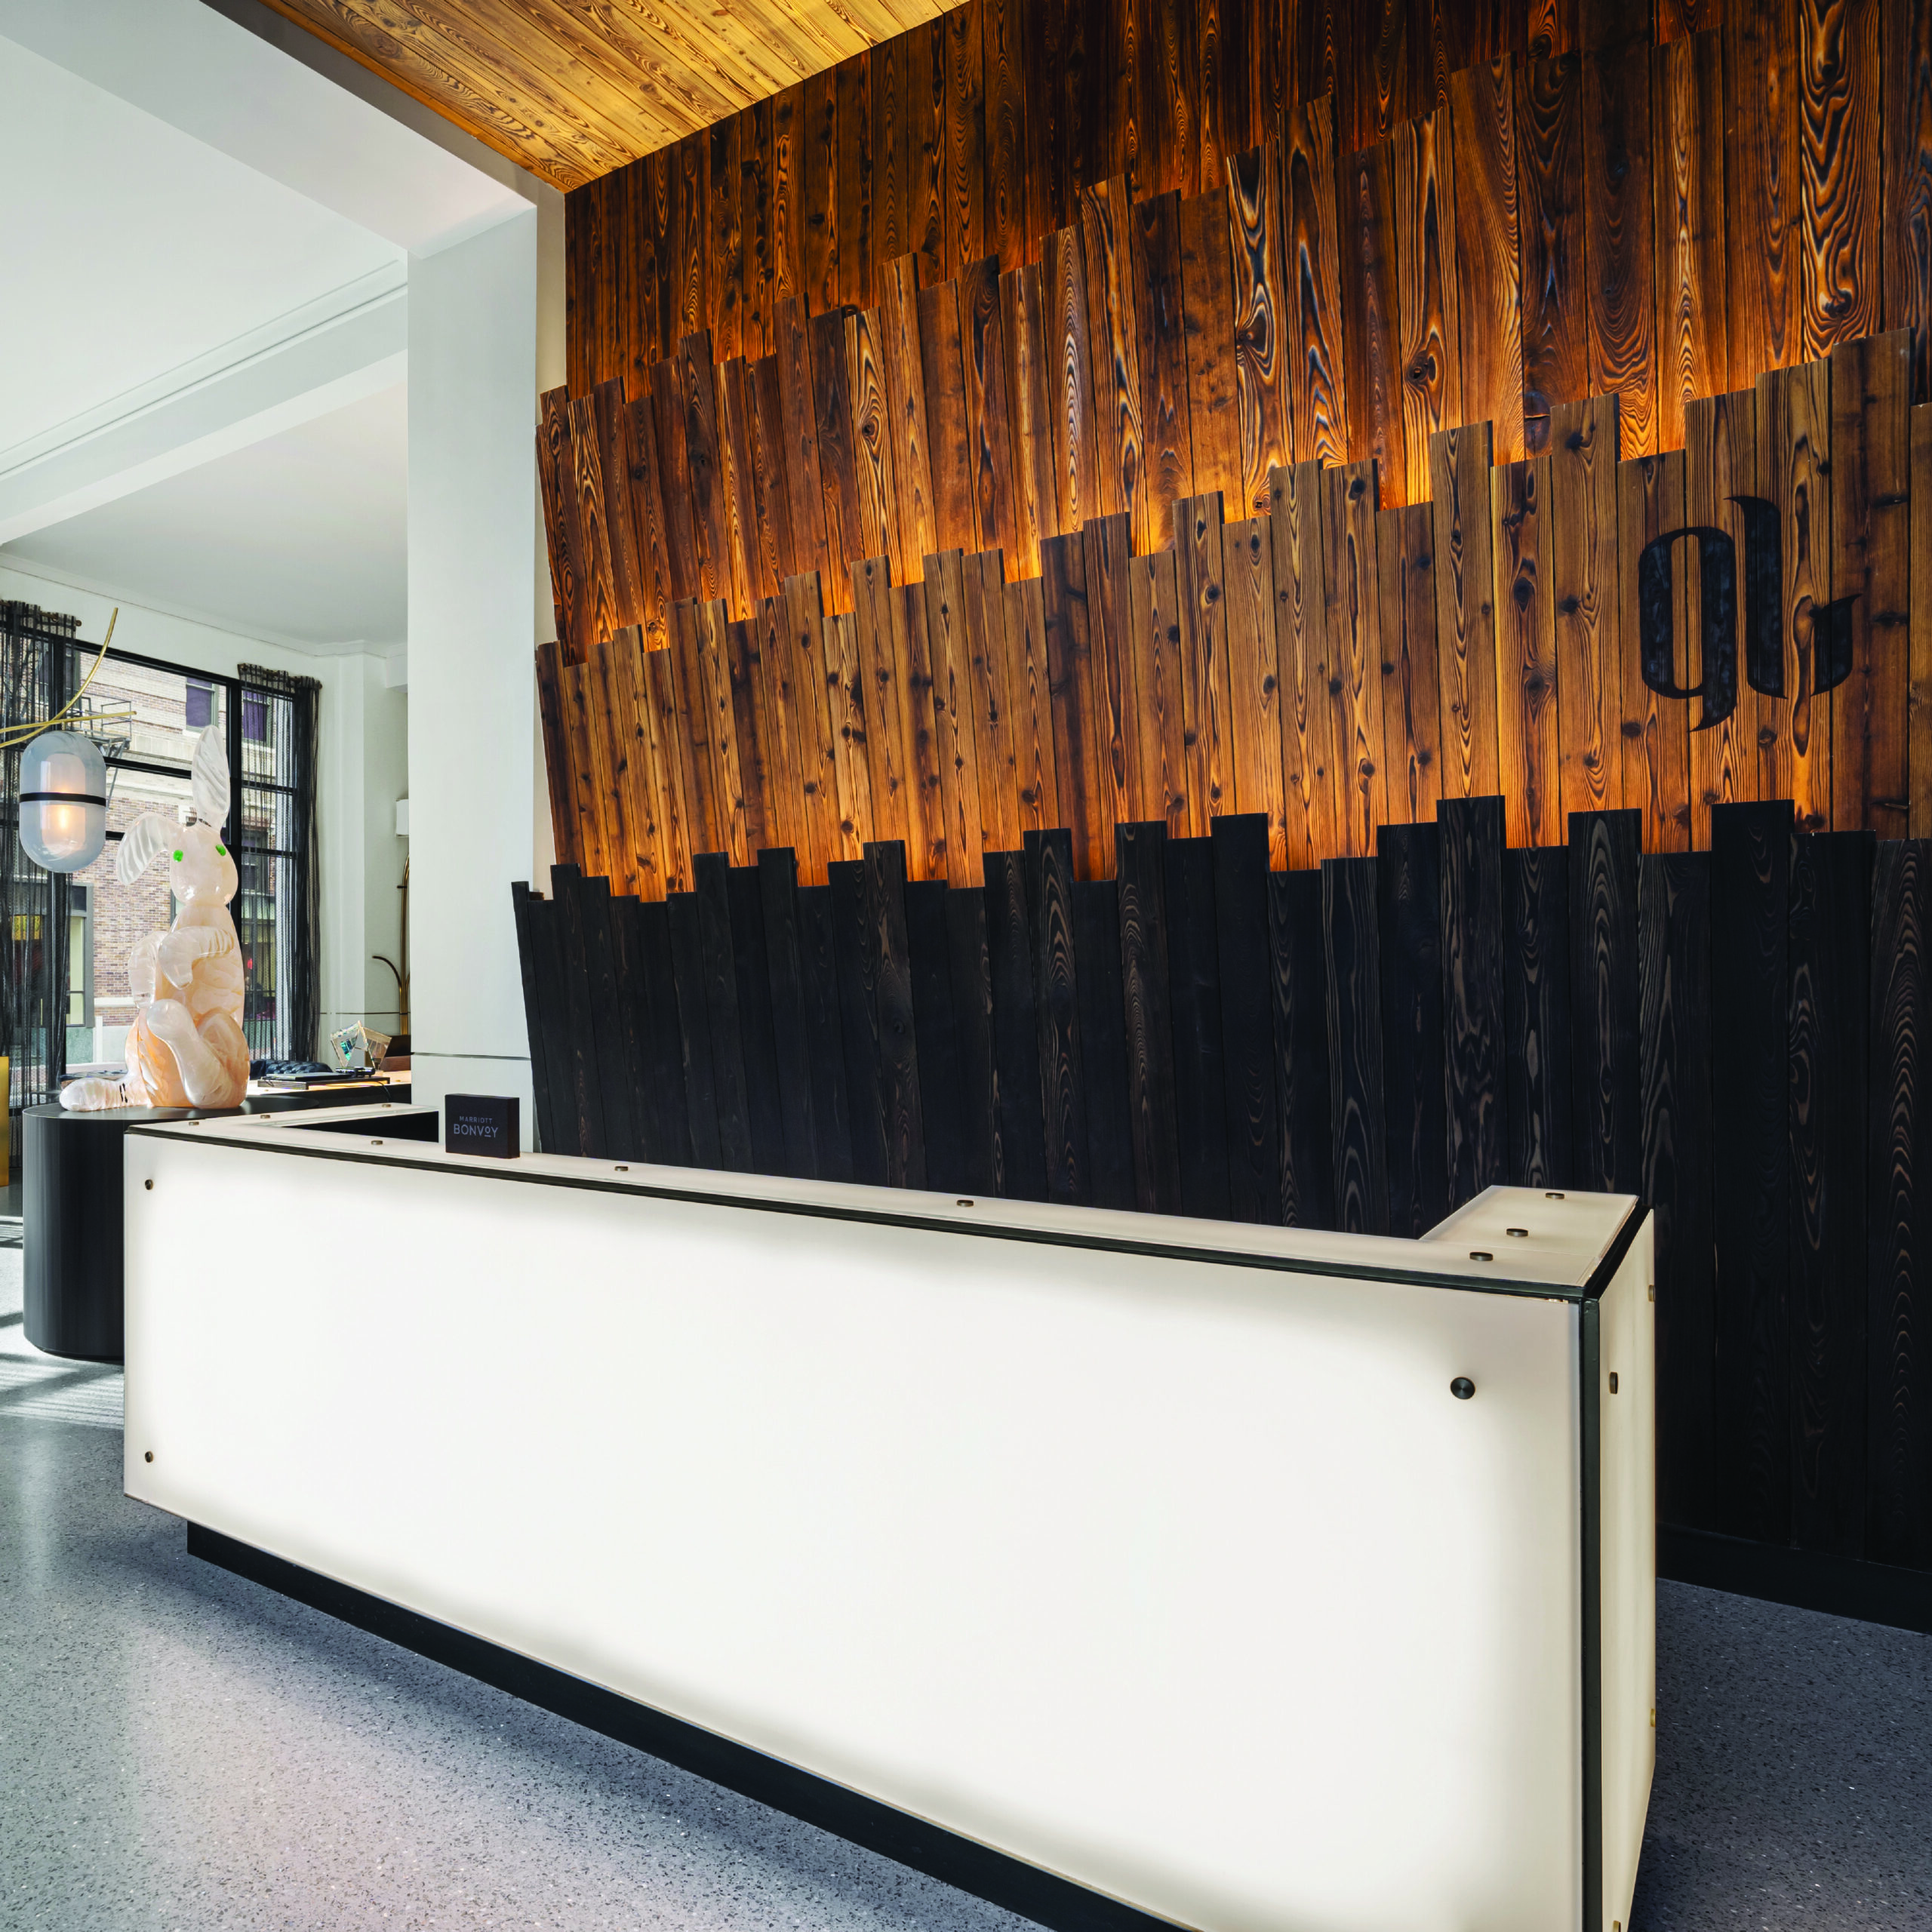 white reception desk in the foreground with a multi-colored wood wall and a glass sculpture of a rabbit in the background.